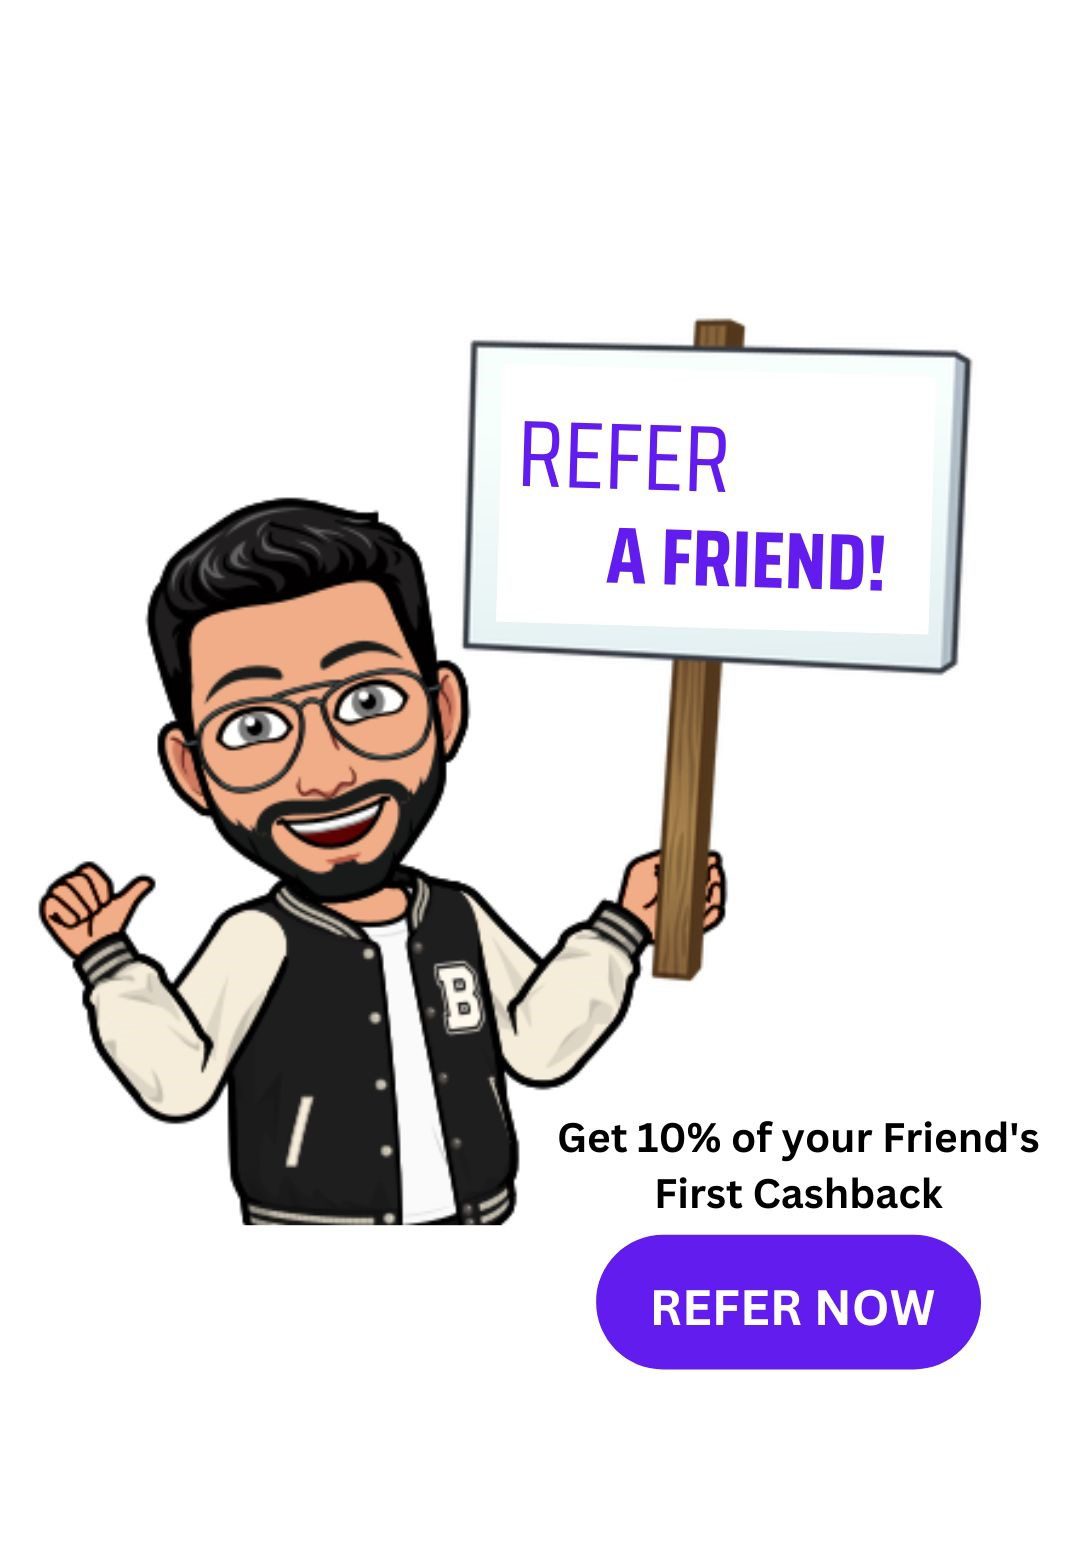 Refer a friends and get 10% of your Friend's First Cashback